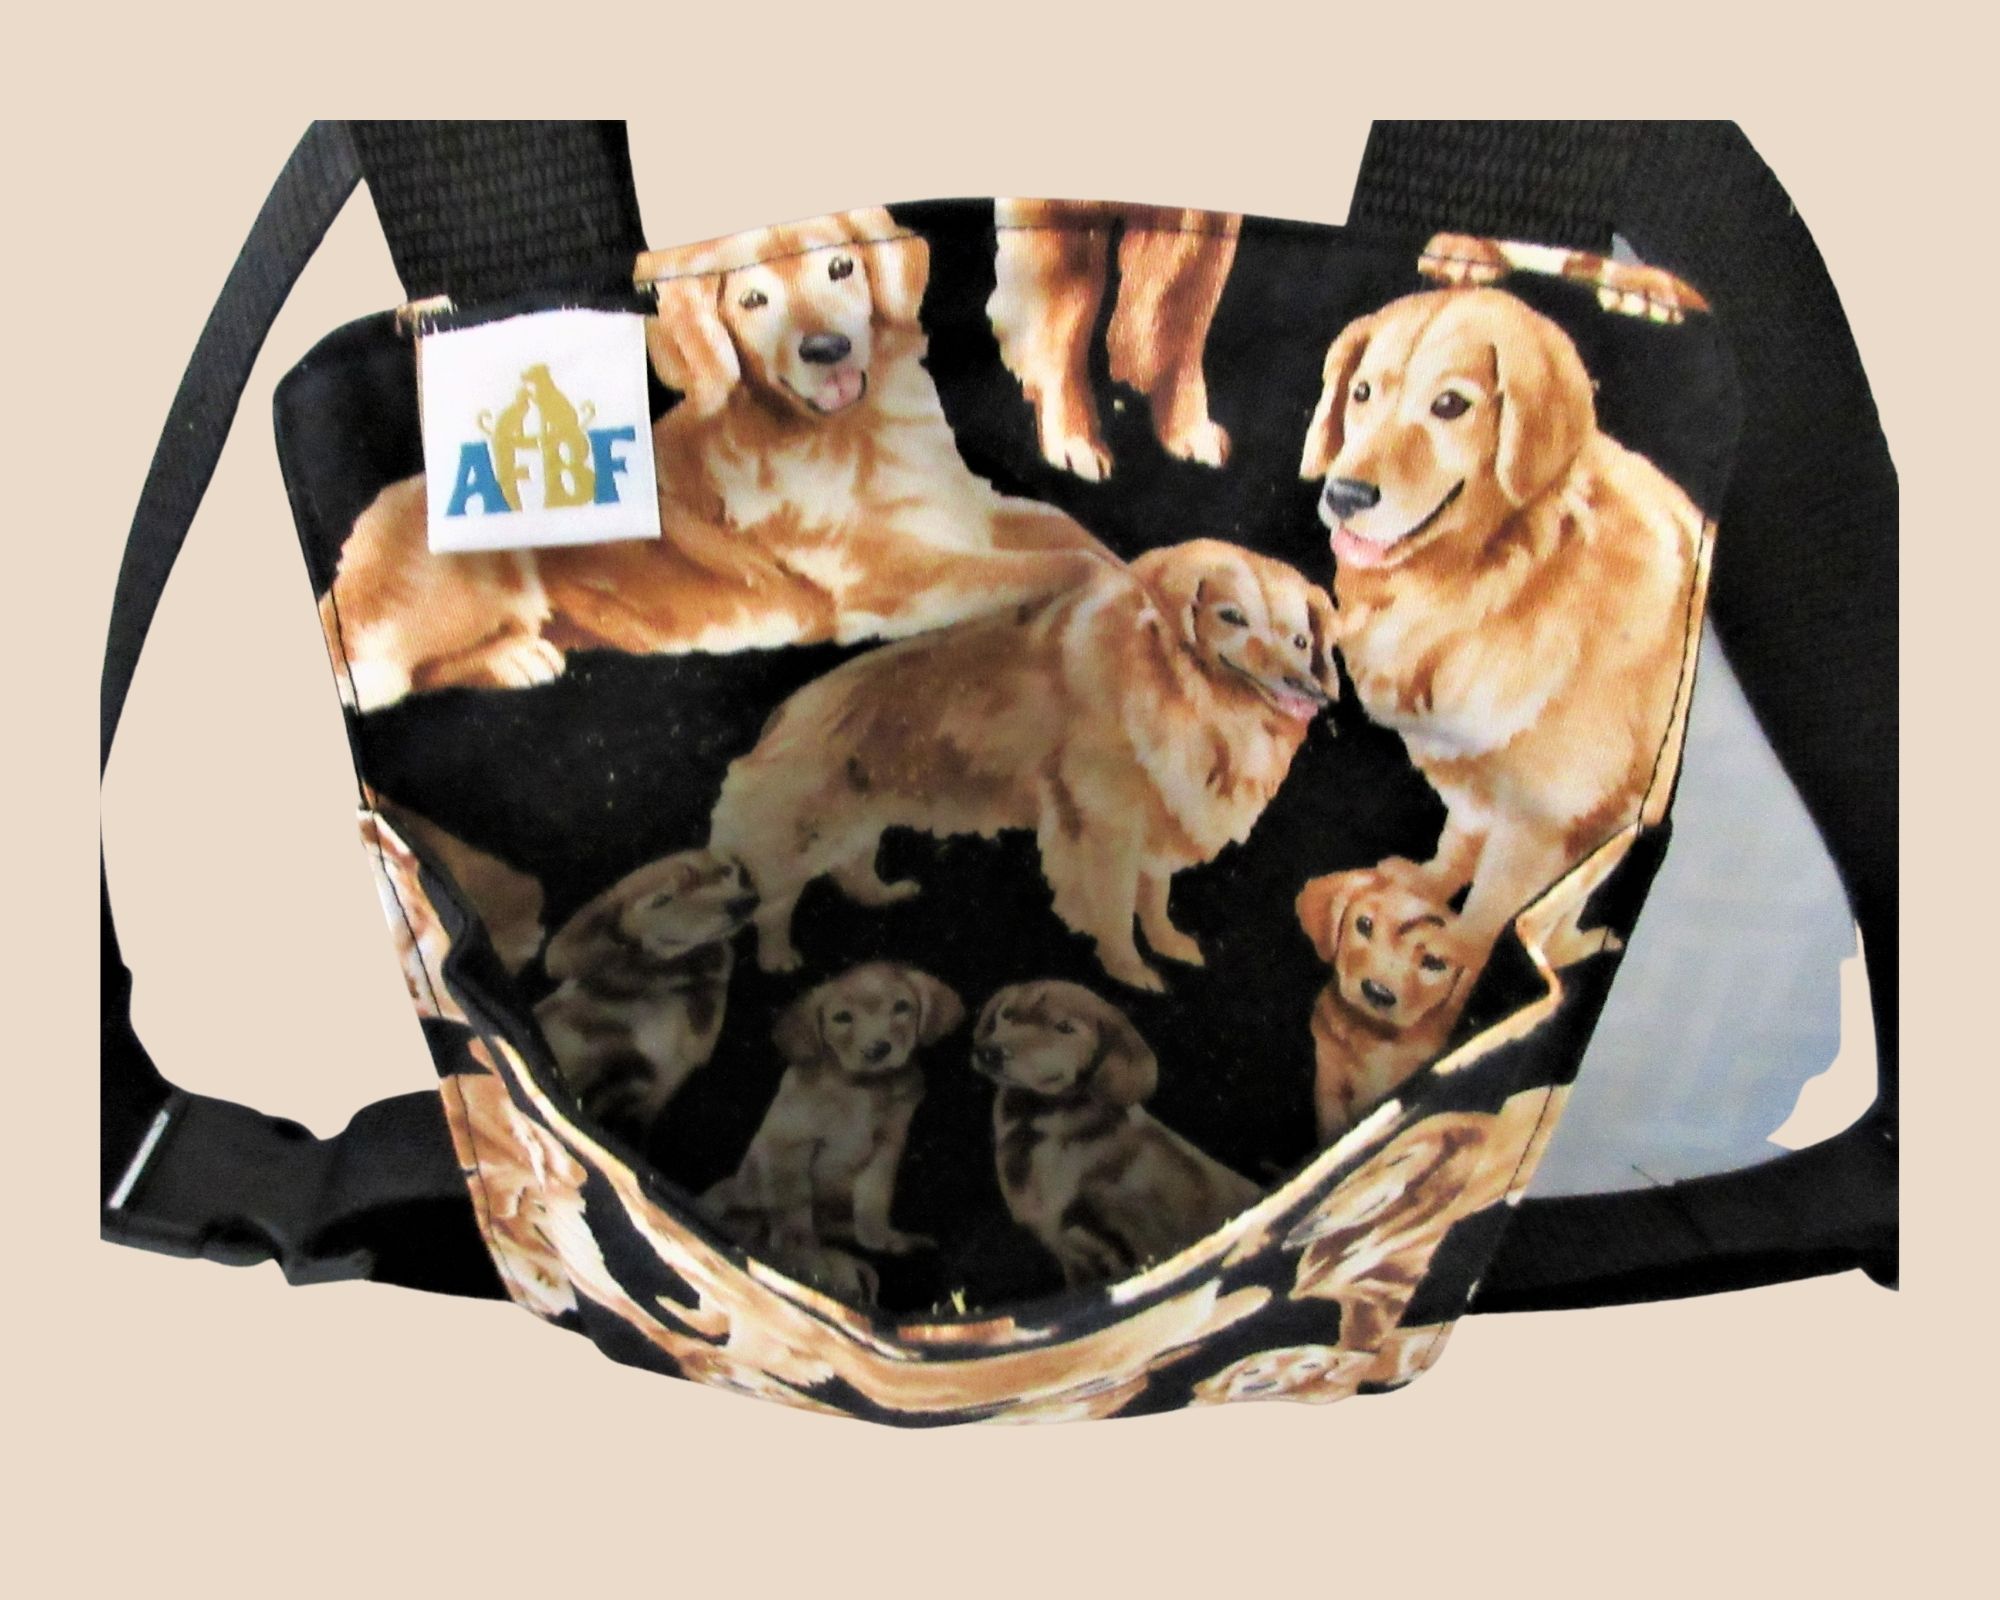 Golden Retriever Training Treat Holder, LargeTreat Pouch in Black, Tan, and White, Great Gift for Agility trainers